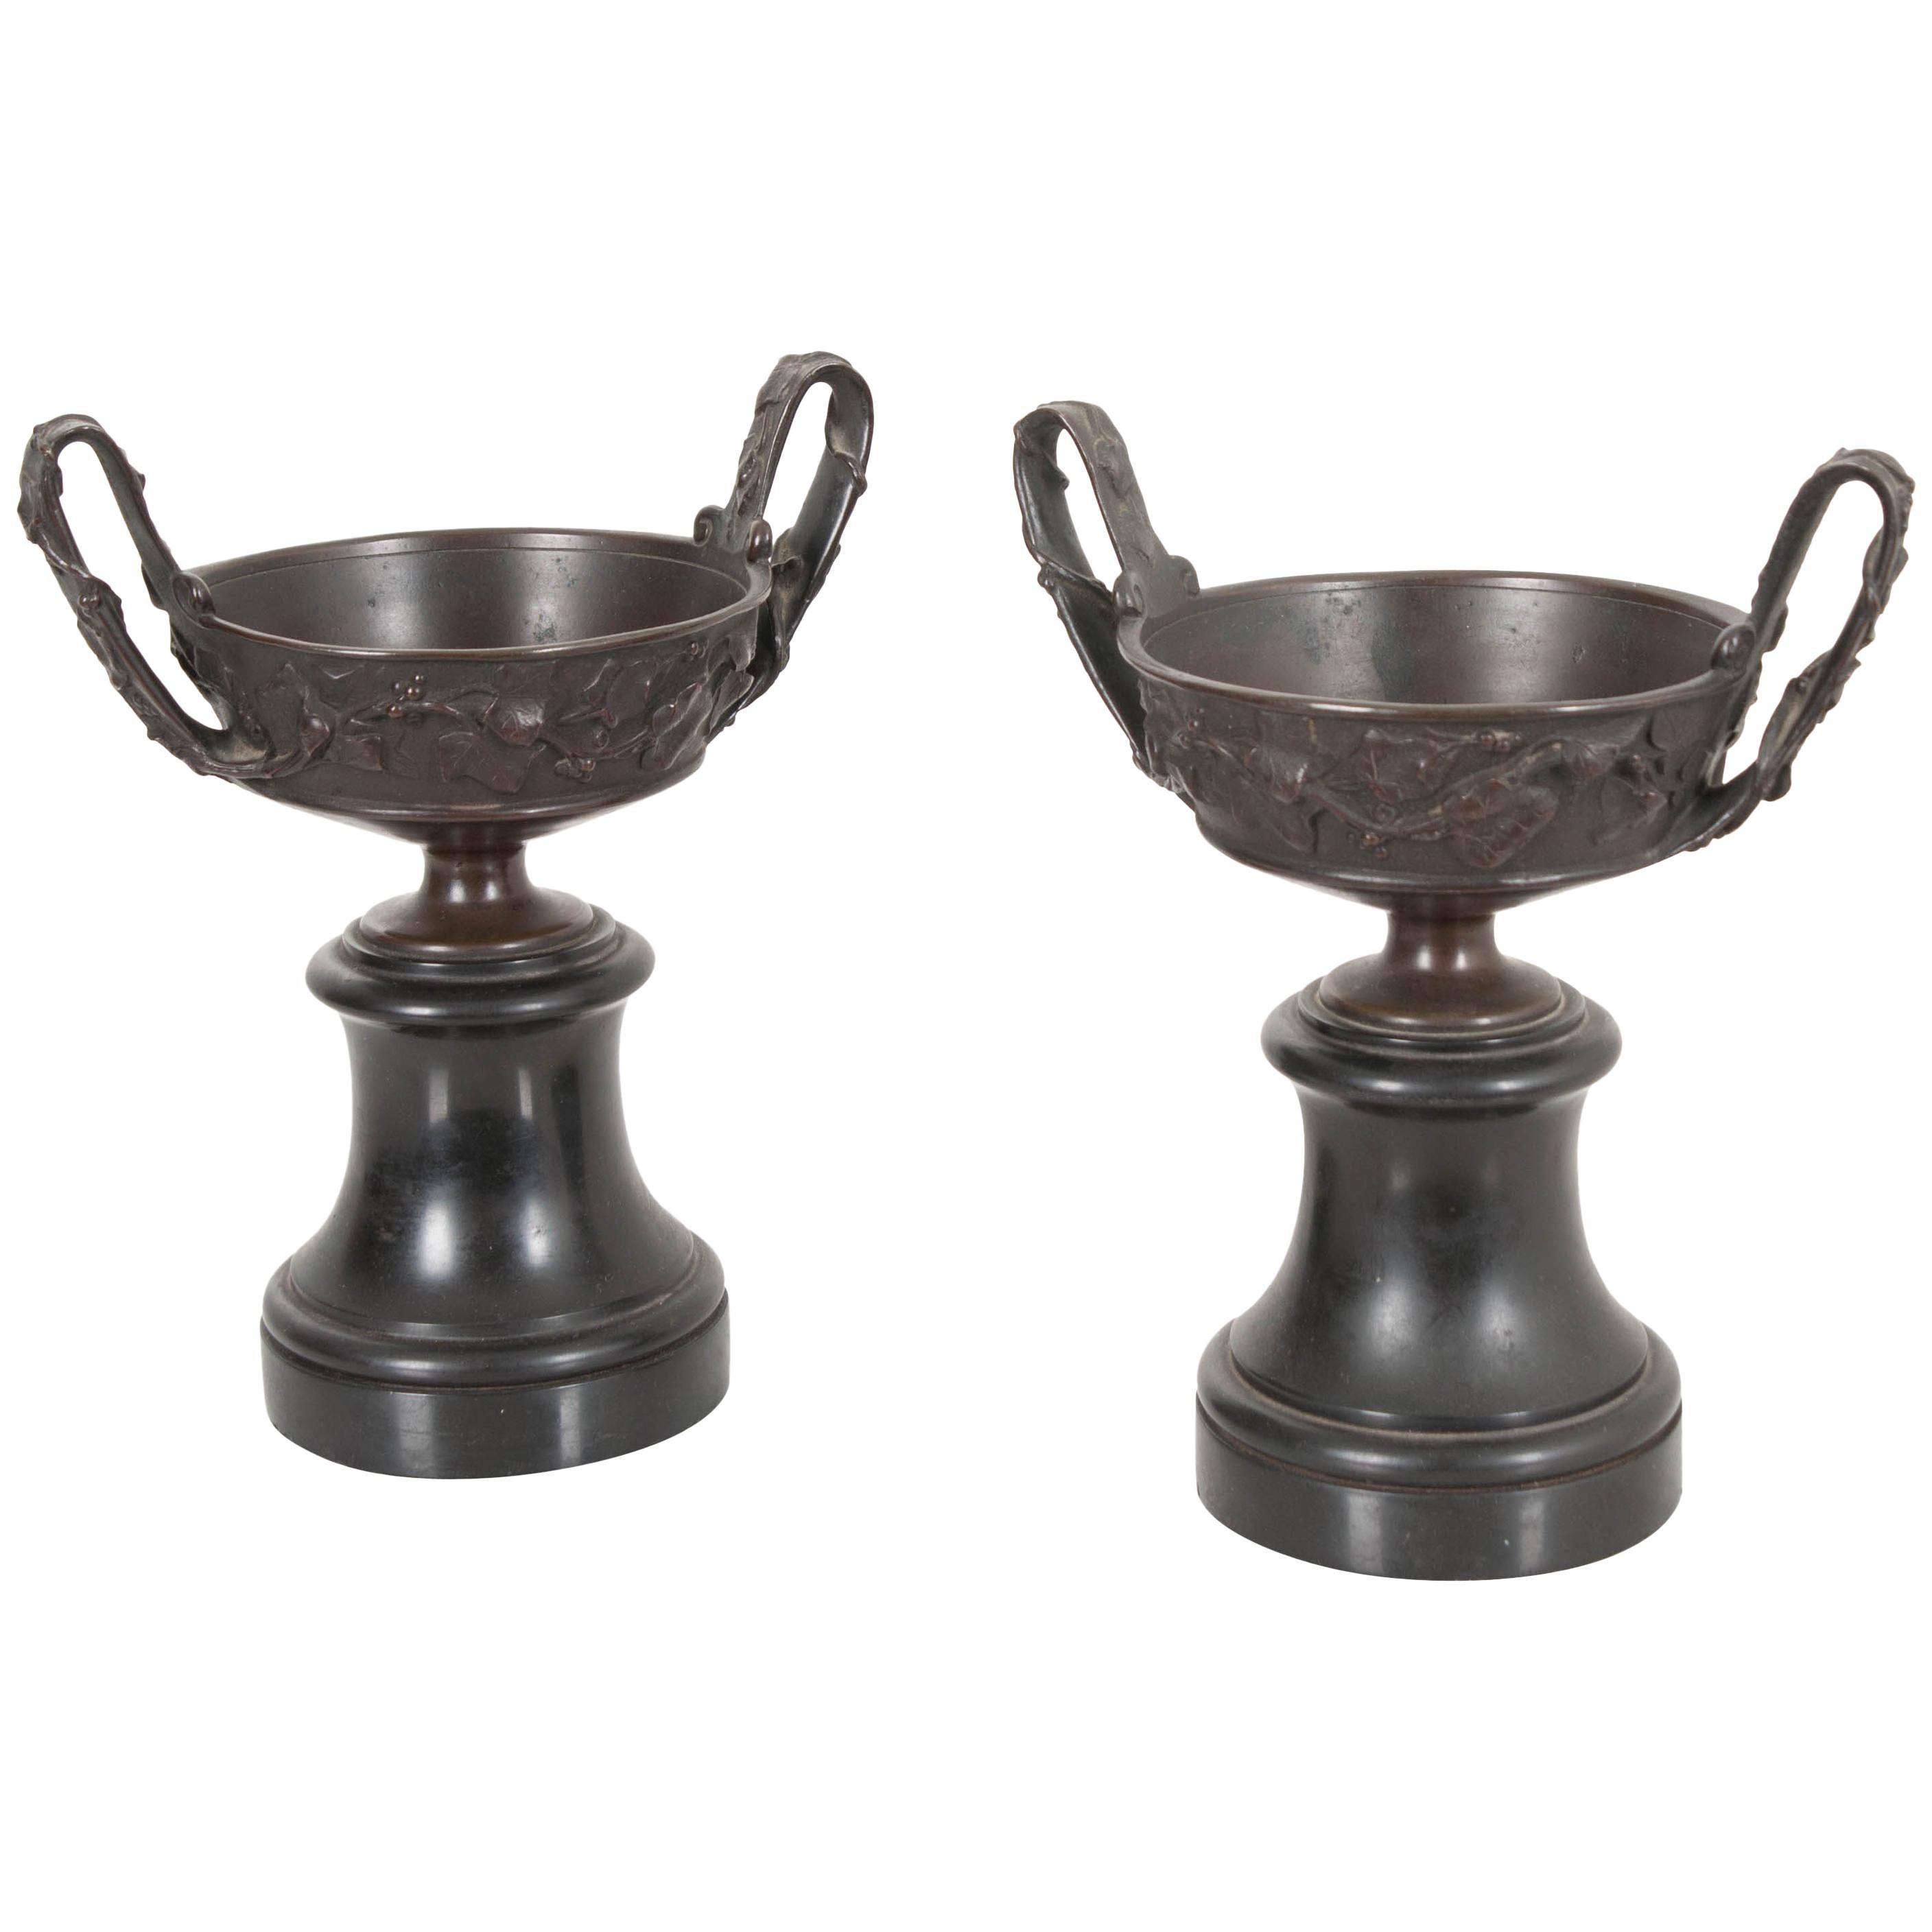 Pair of 19th Century French Bronze Tazza Urns on Marble Bases